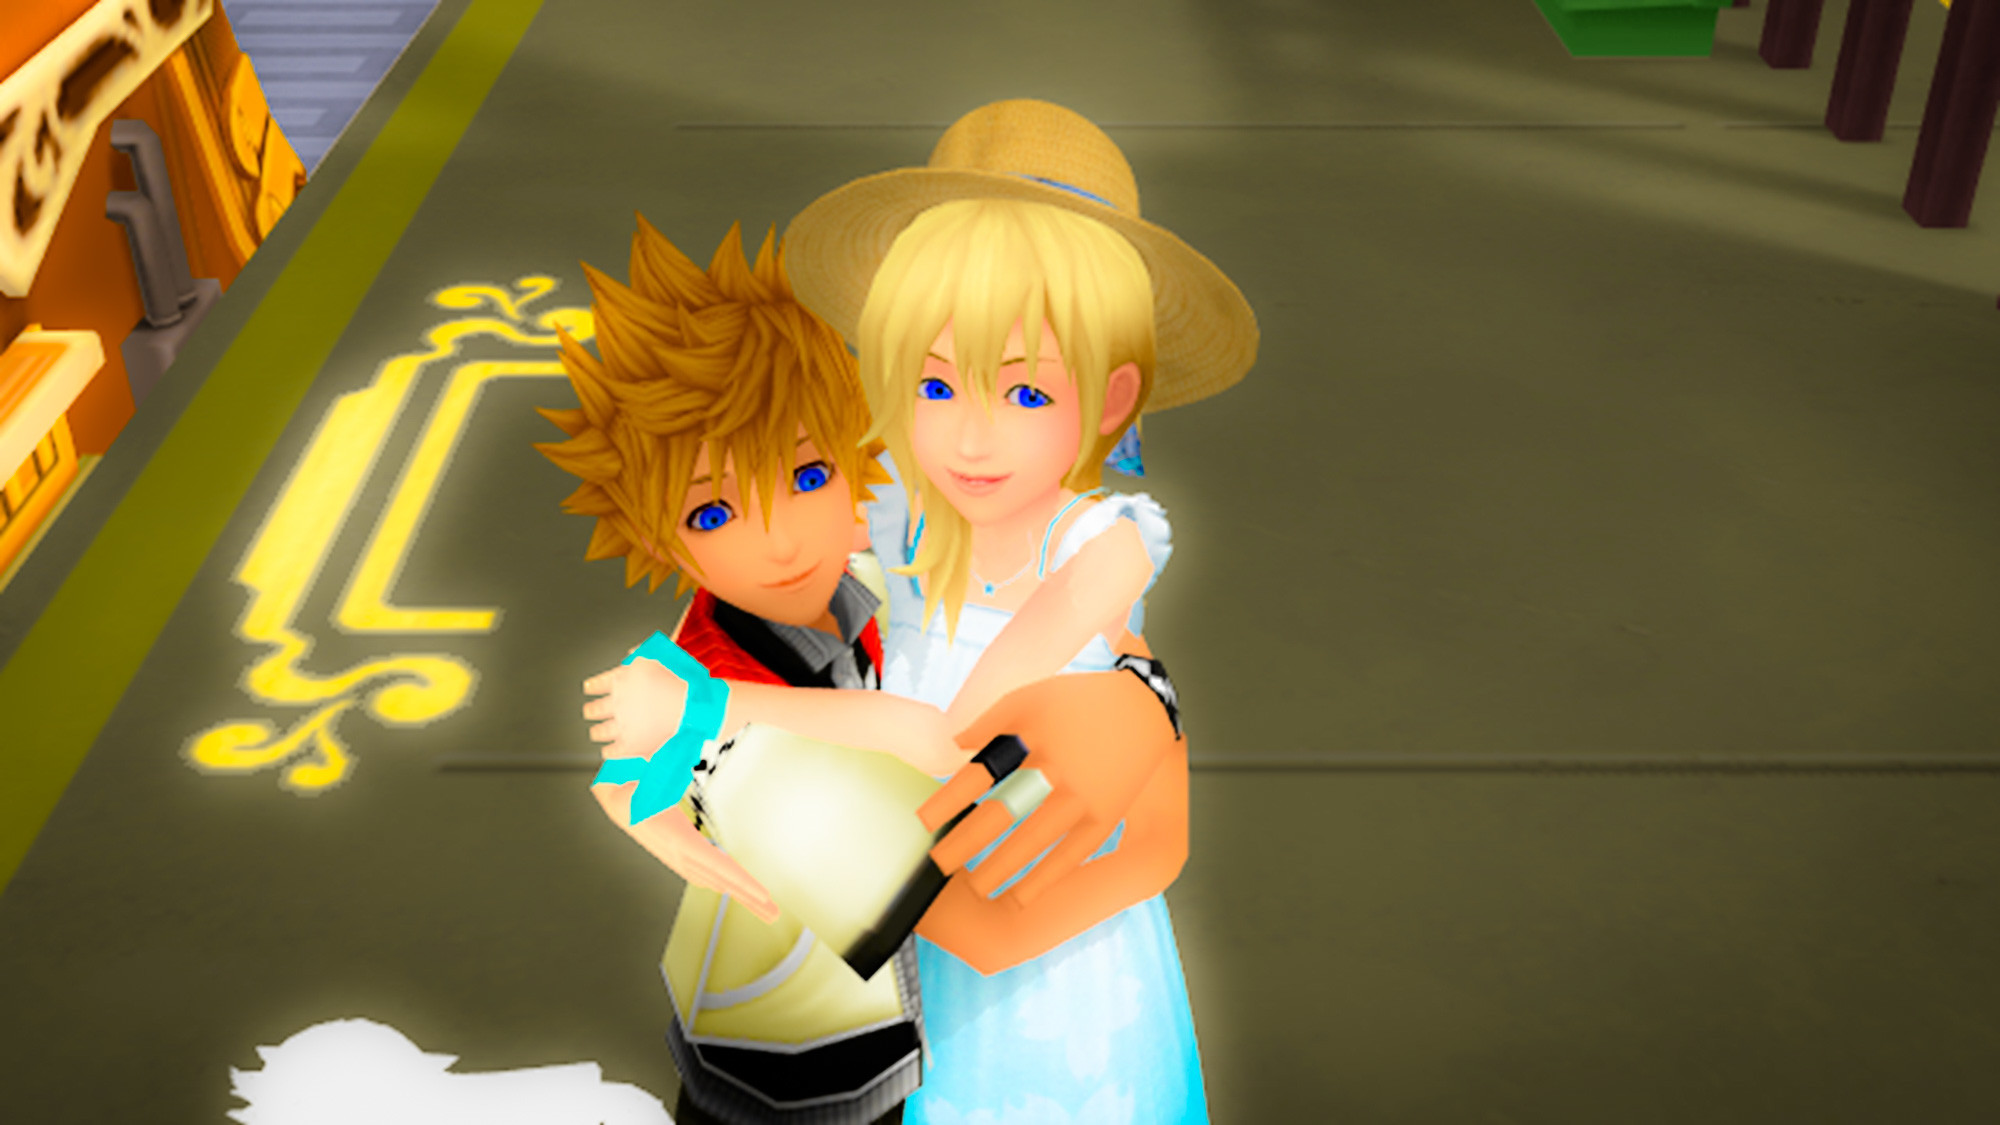 2000x1125 Roxas and Namine images Roxas and Namine Sunset Station Love edited HD  wallpaper and background photos